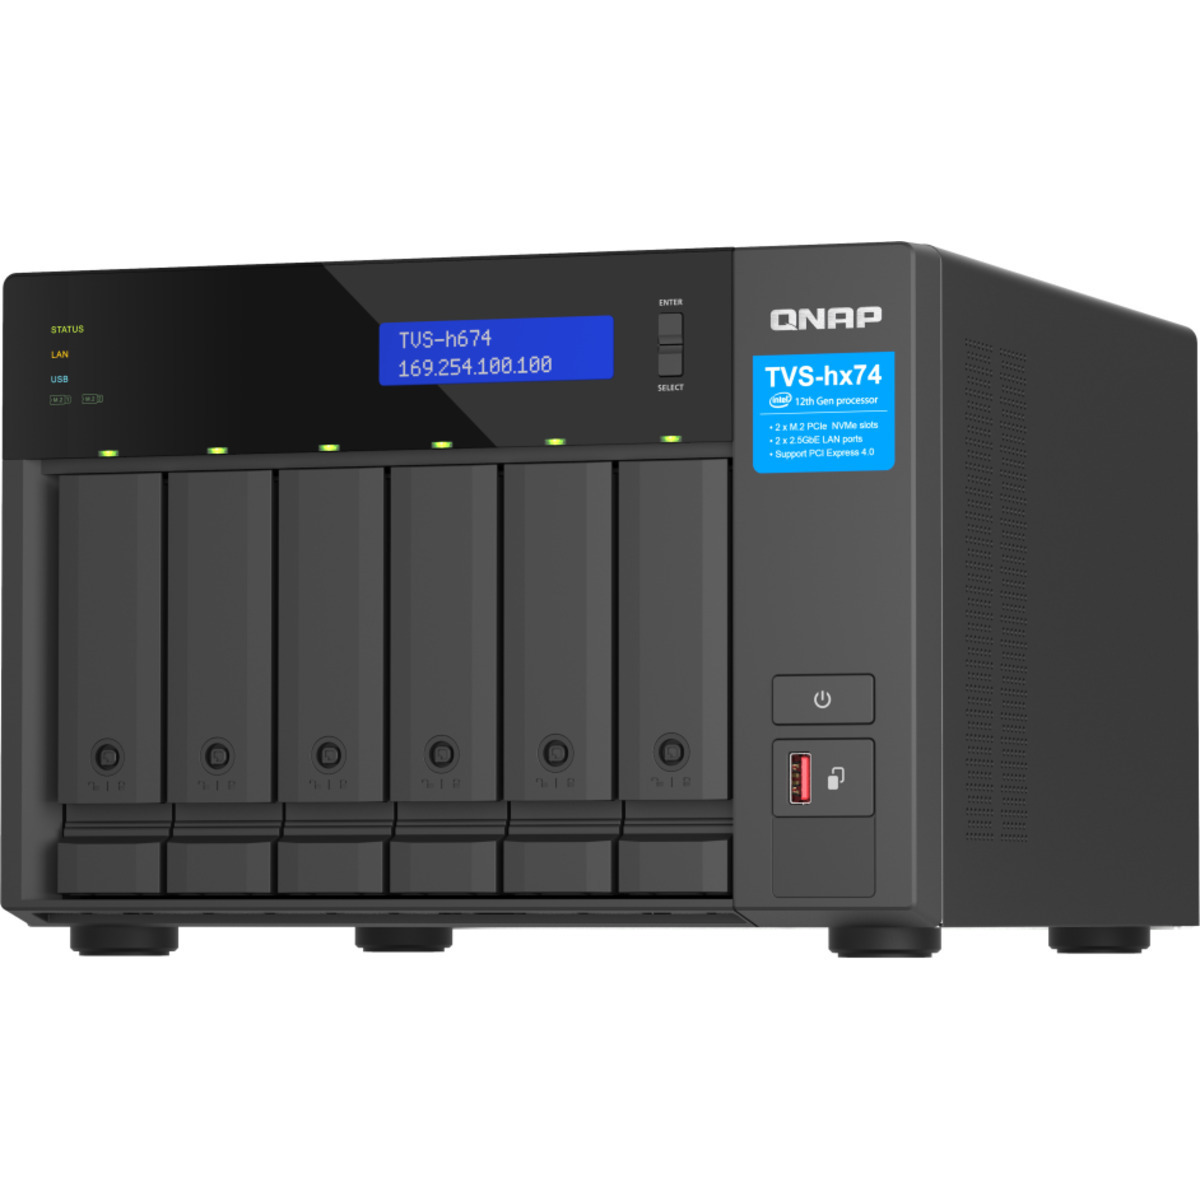 buy $4078 QNAP TVS-h674 Core i5 48tb Desktop NAS - Network Attached Storage Device 6x8000gb Western Digital Gold WD8004FRYZ 3.5 7200rpm SATA 6Gb/s HDD ENTERPRISE Class Drives Installed - Burn-In Tested - nas headquarters buy network attached storage server device das new raid-5 free shipping simply usa TVS-h674 Core i5